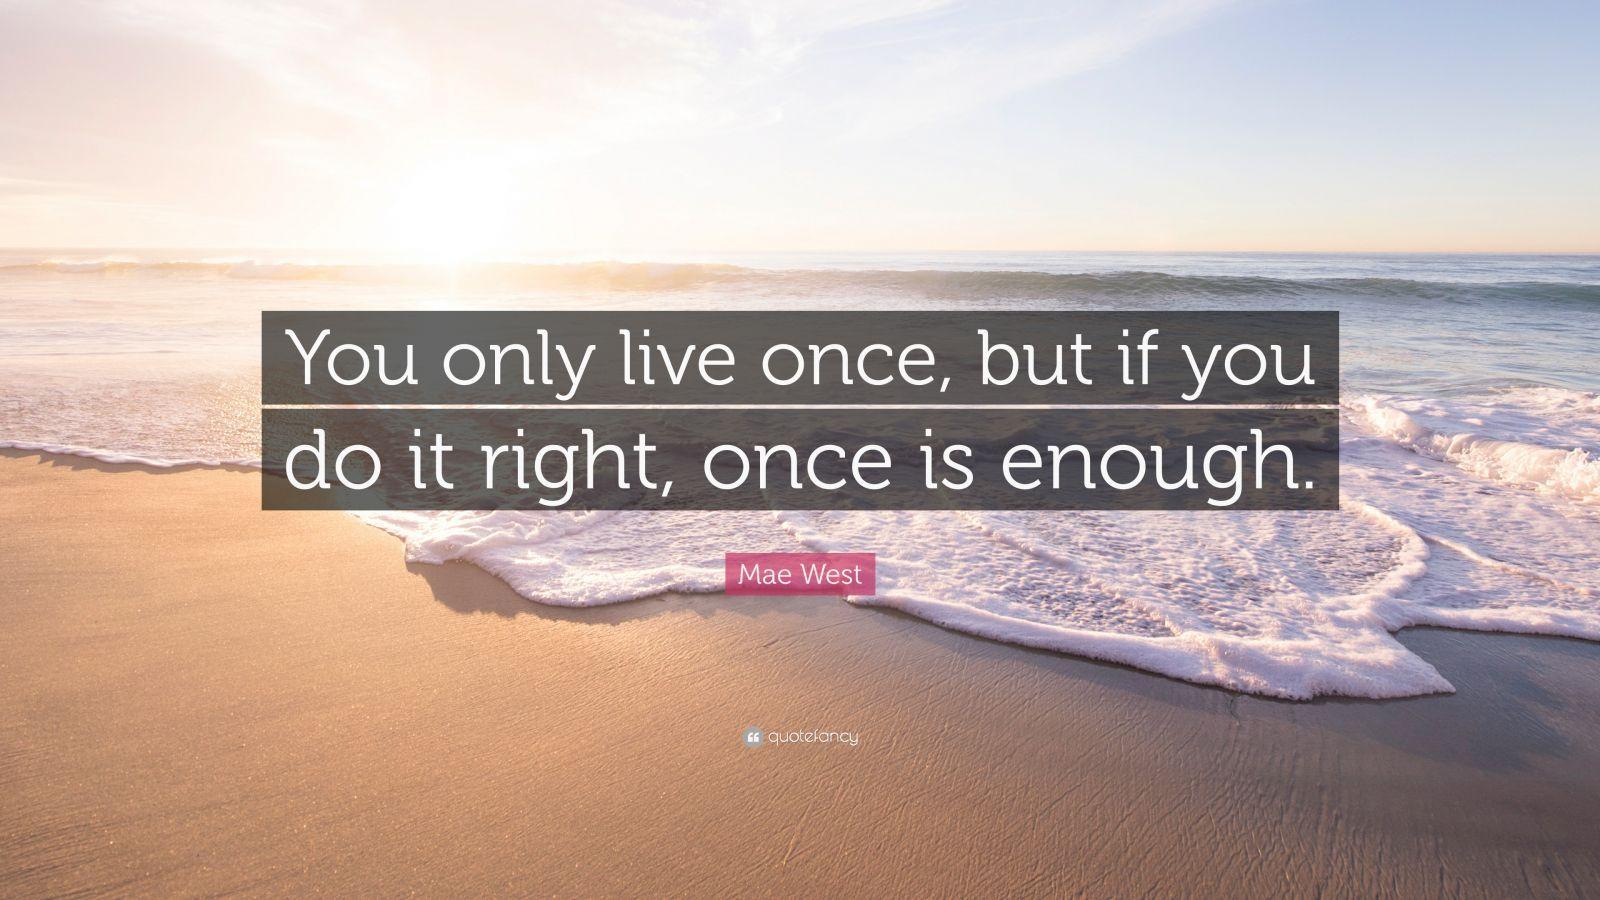 Mae West Quote: “You only live once, but if you do it right, once is enough.” (31 wallpaper)